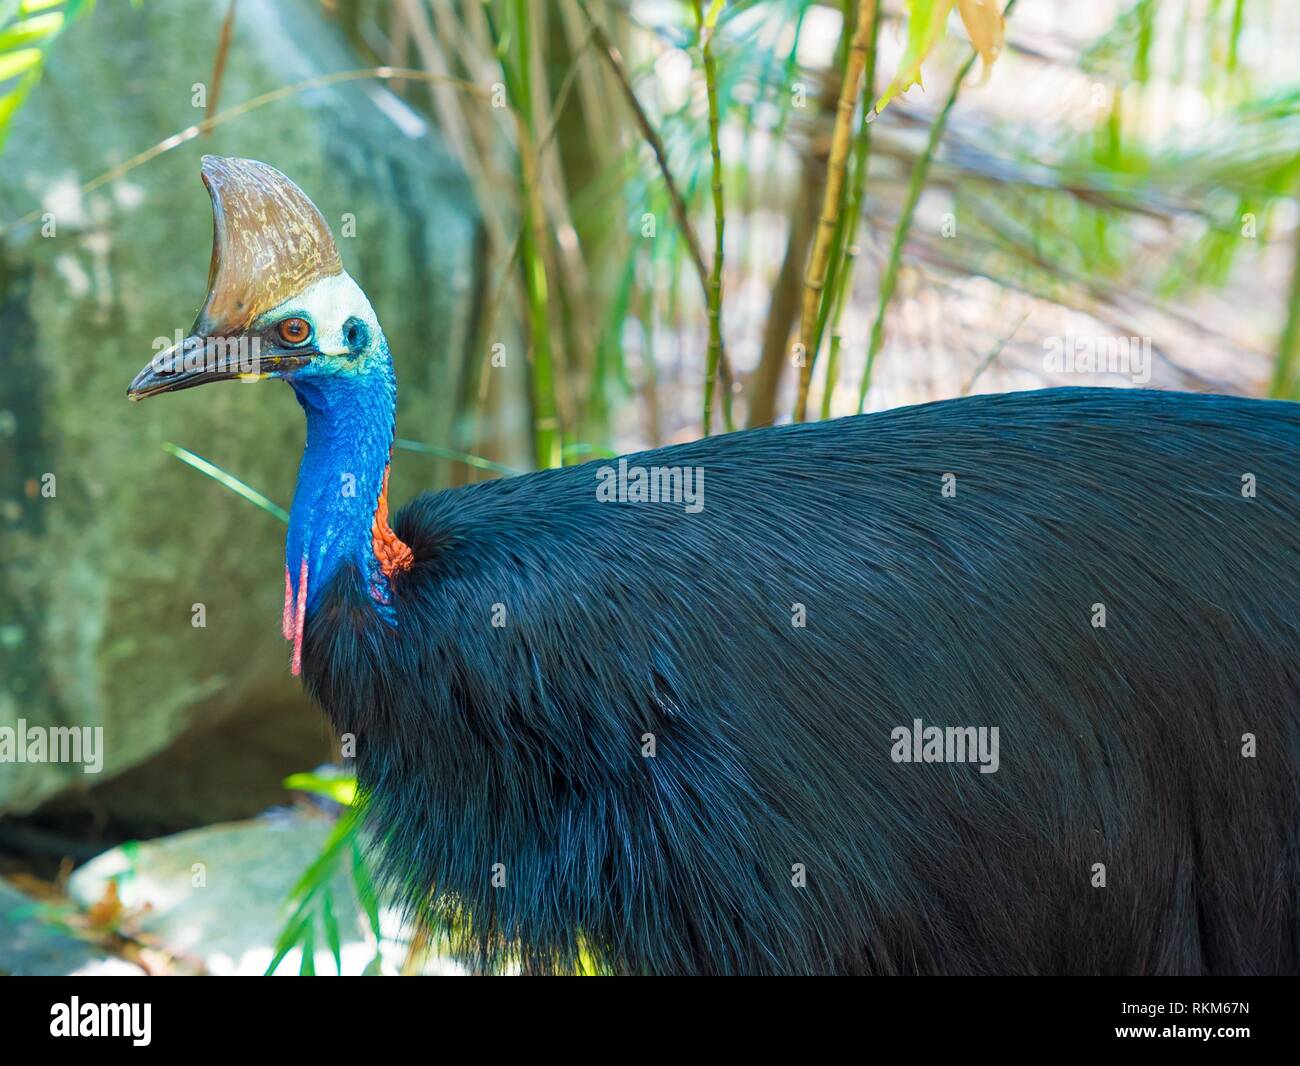 Portrait of Cassowary bird, native to the tropical forests of New Guinea and northeastern Australia. Stock Photo